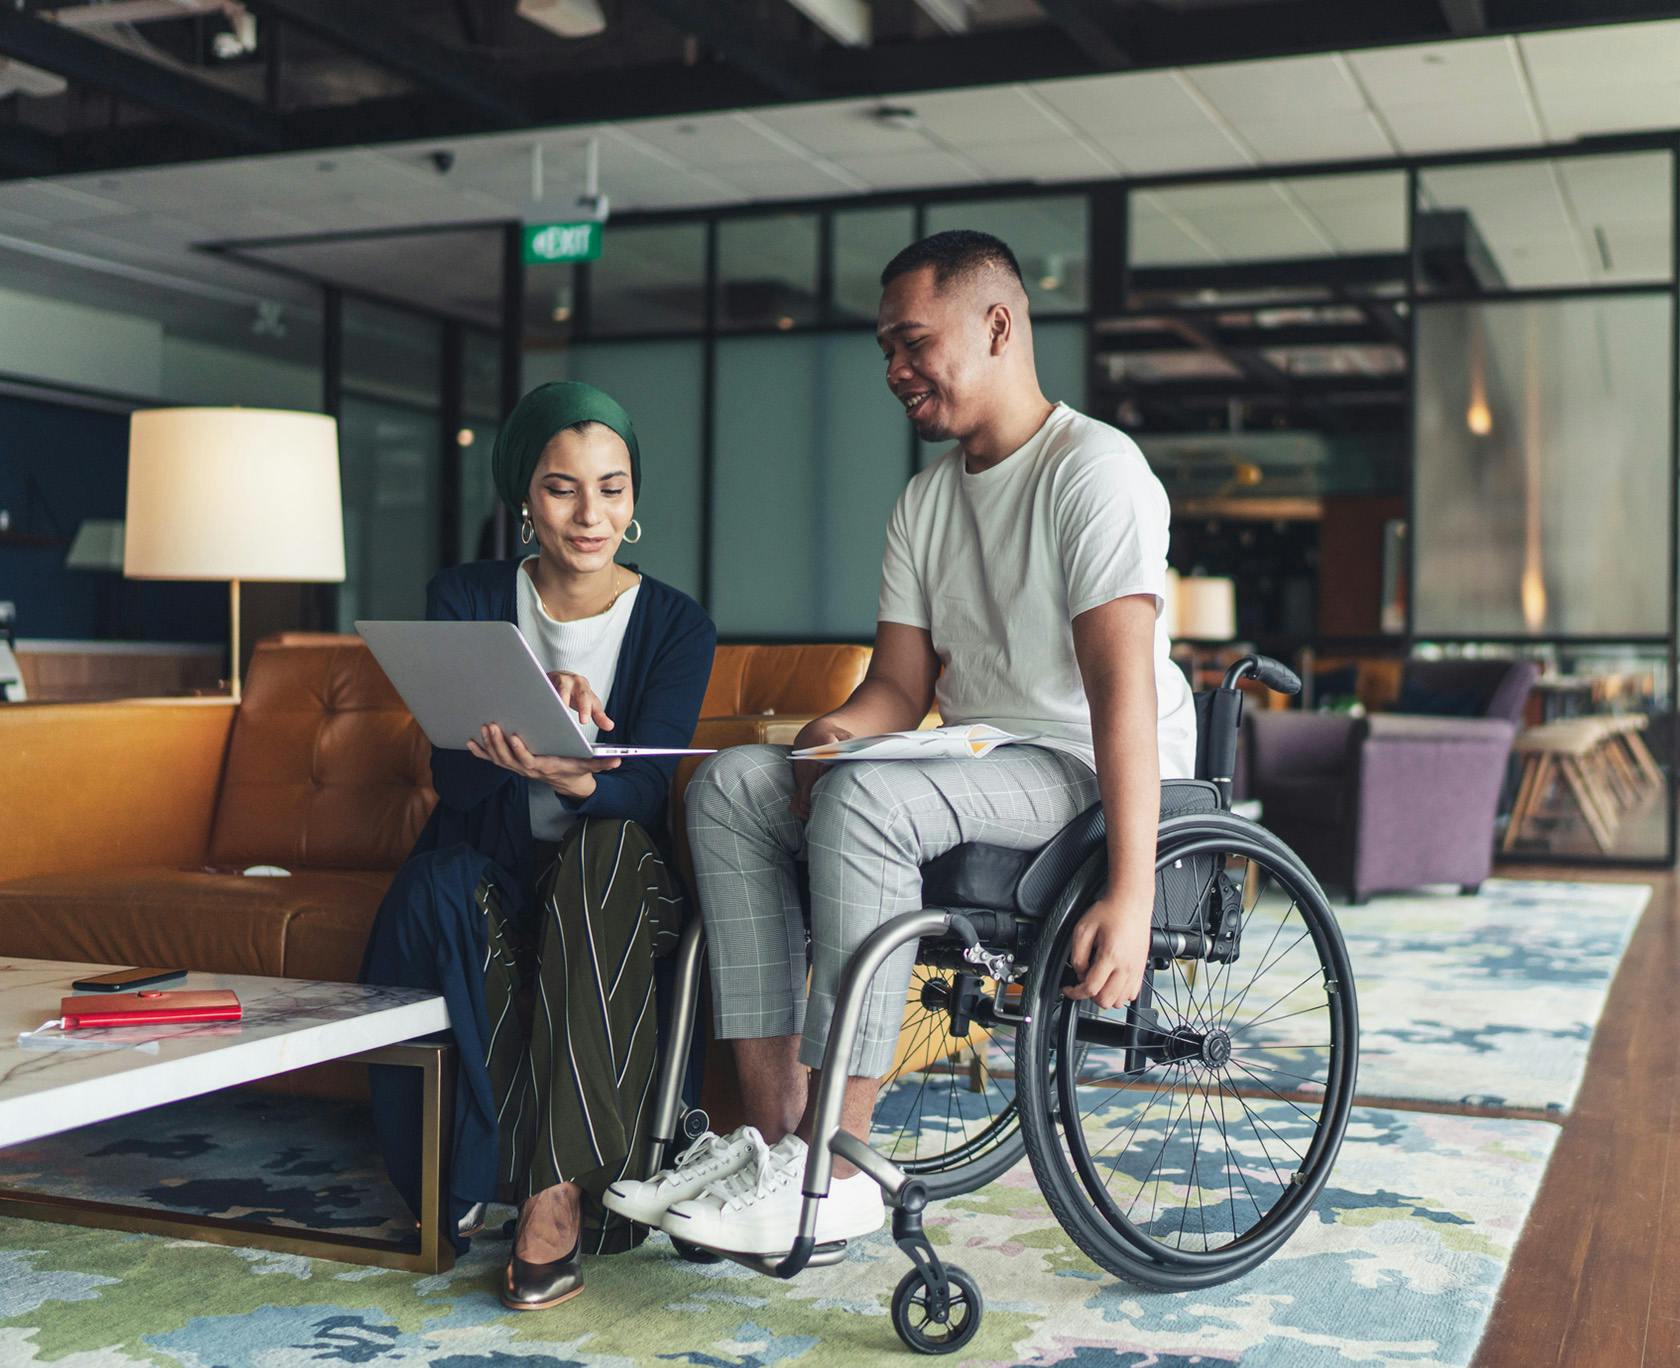 Man in a wheel chair looking at a computer with a woman sitting on a couch